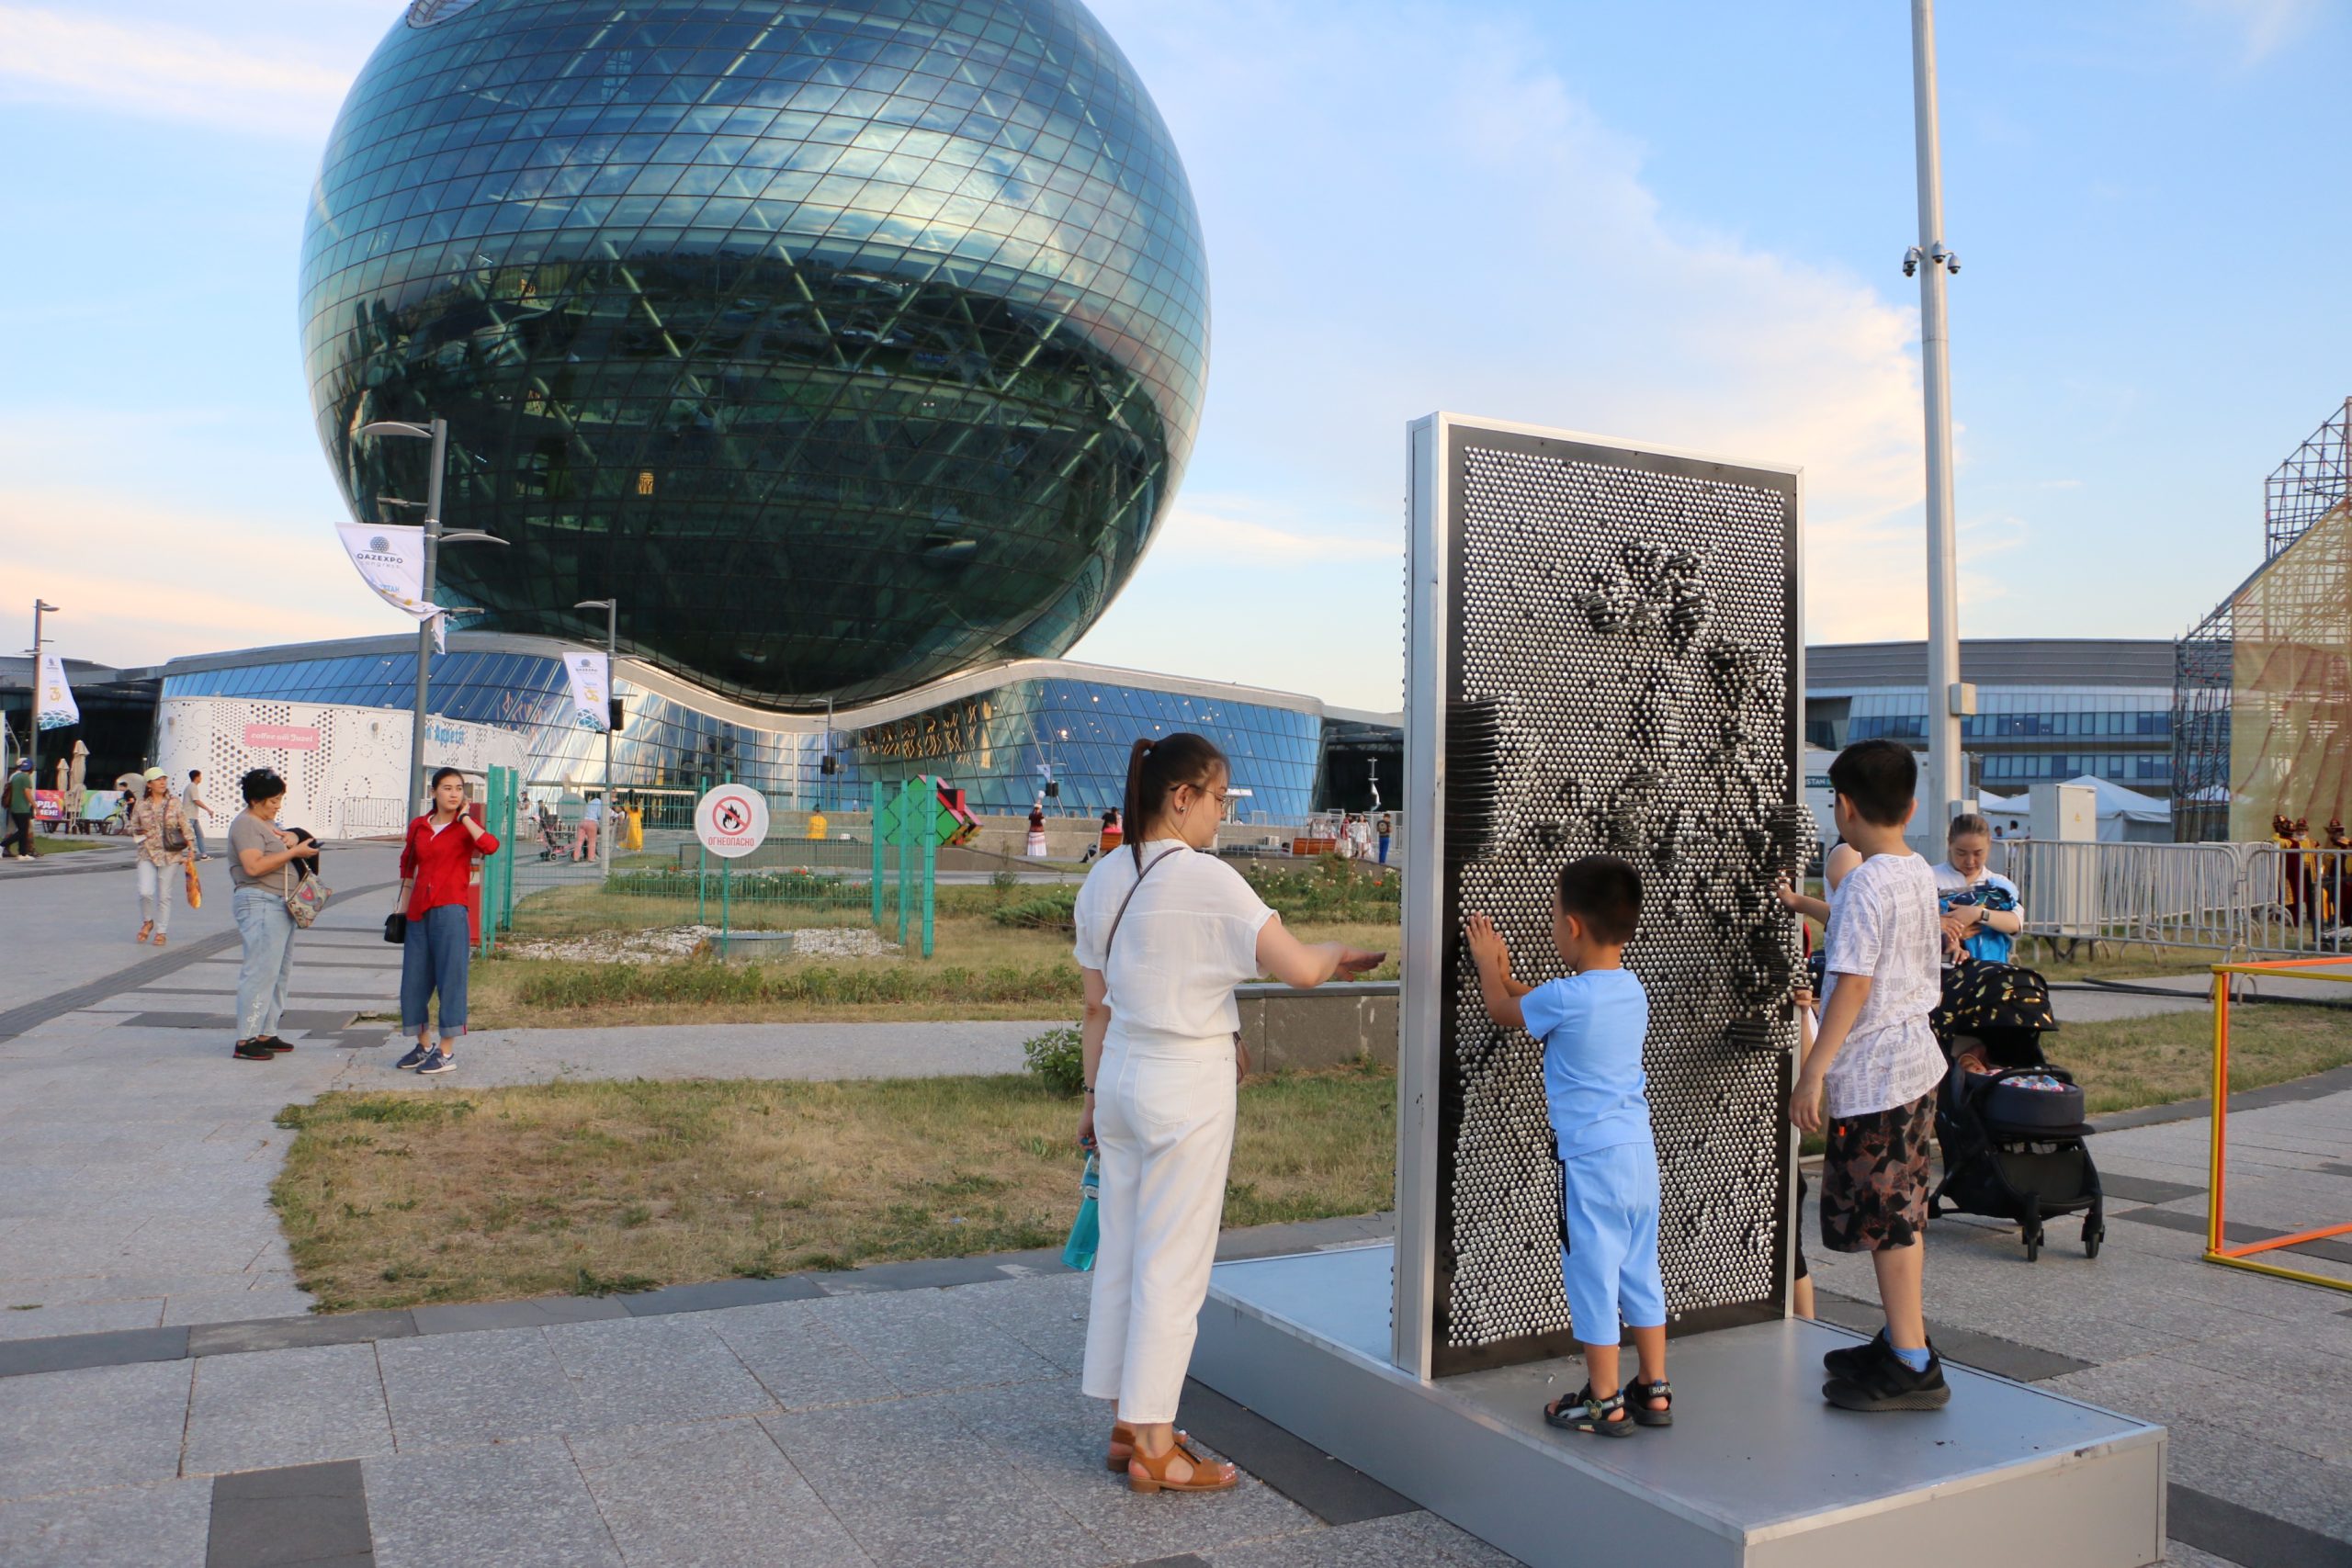 Summer activities on the territory of the EXPO Business Center